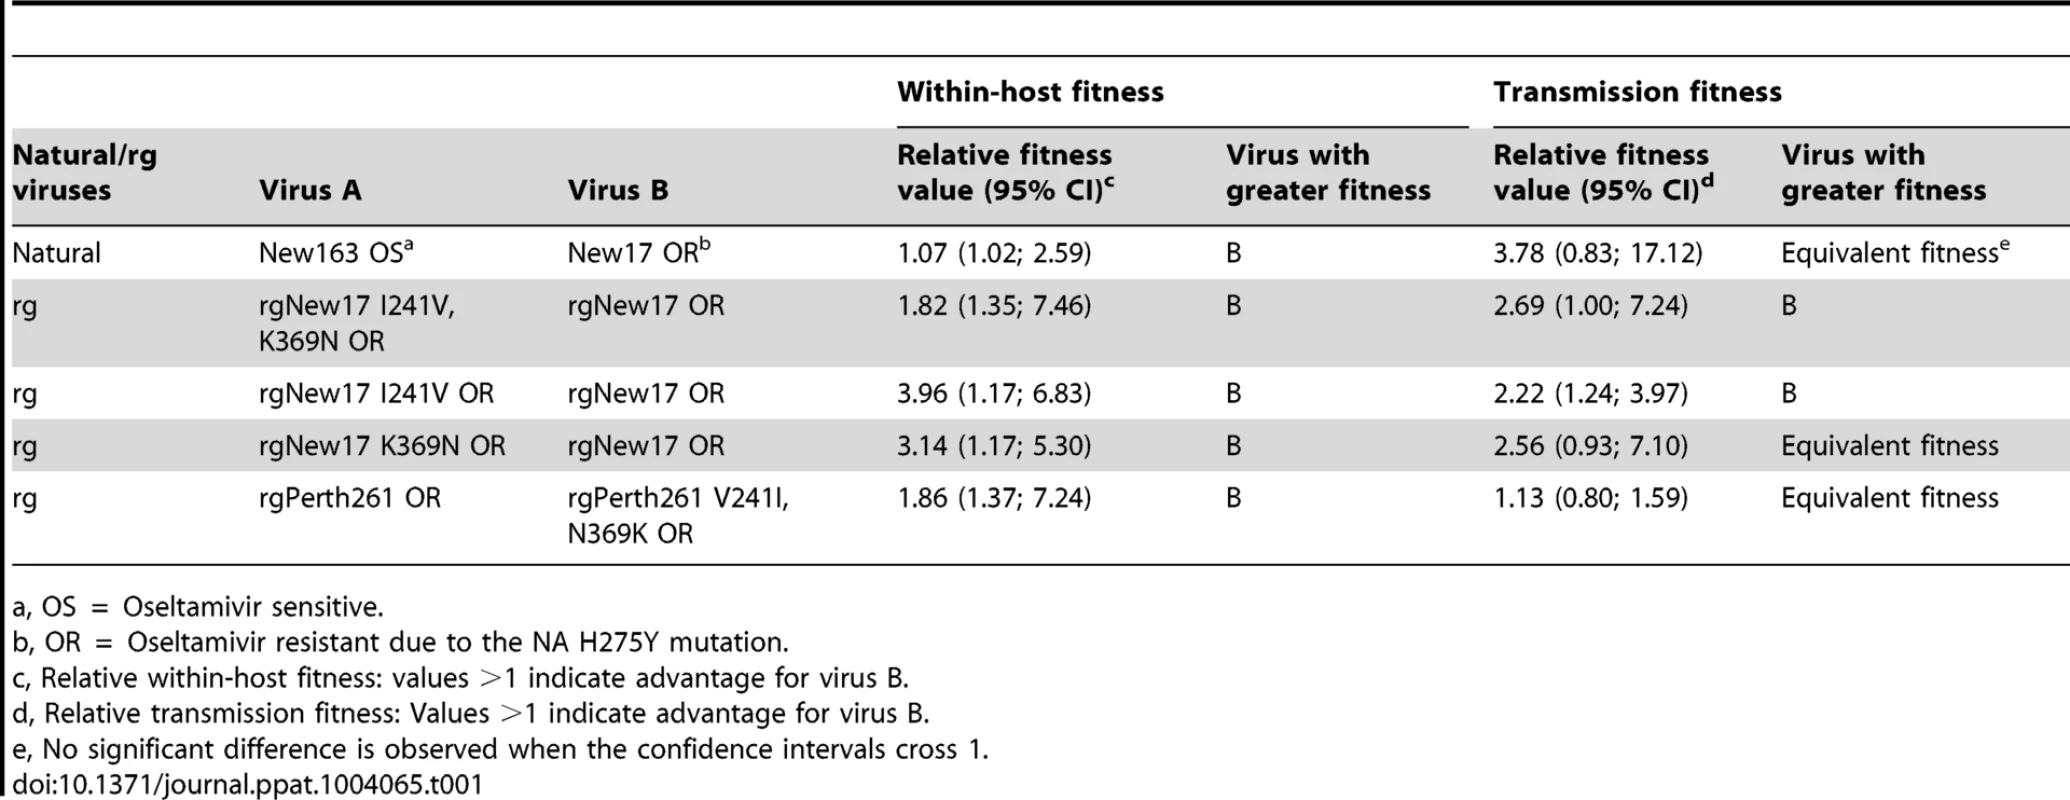 Relative within-host and transmission fitness of virus pairs used in ferret experiments.